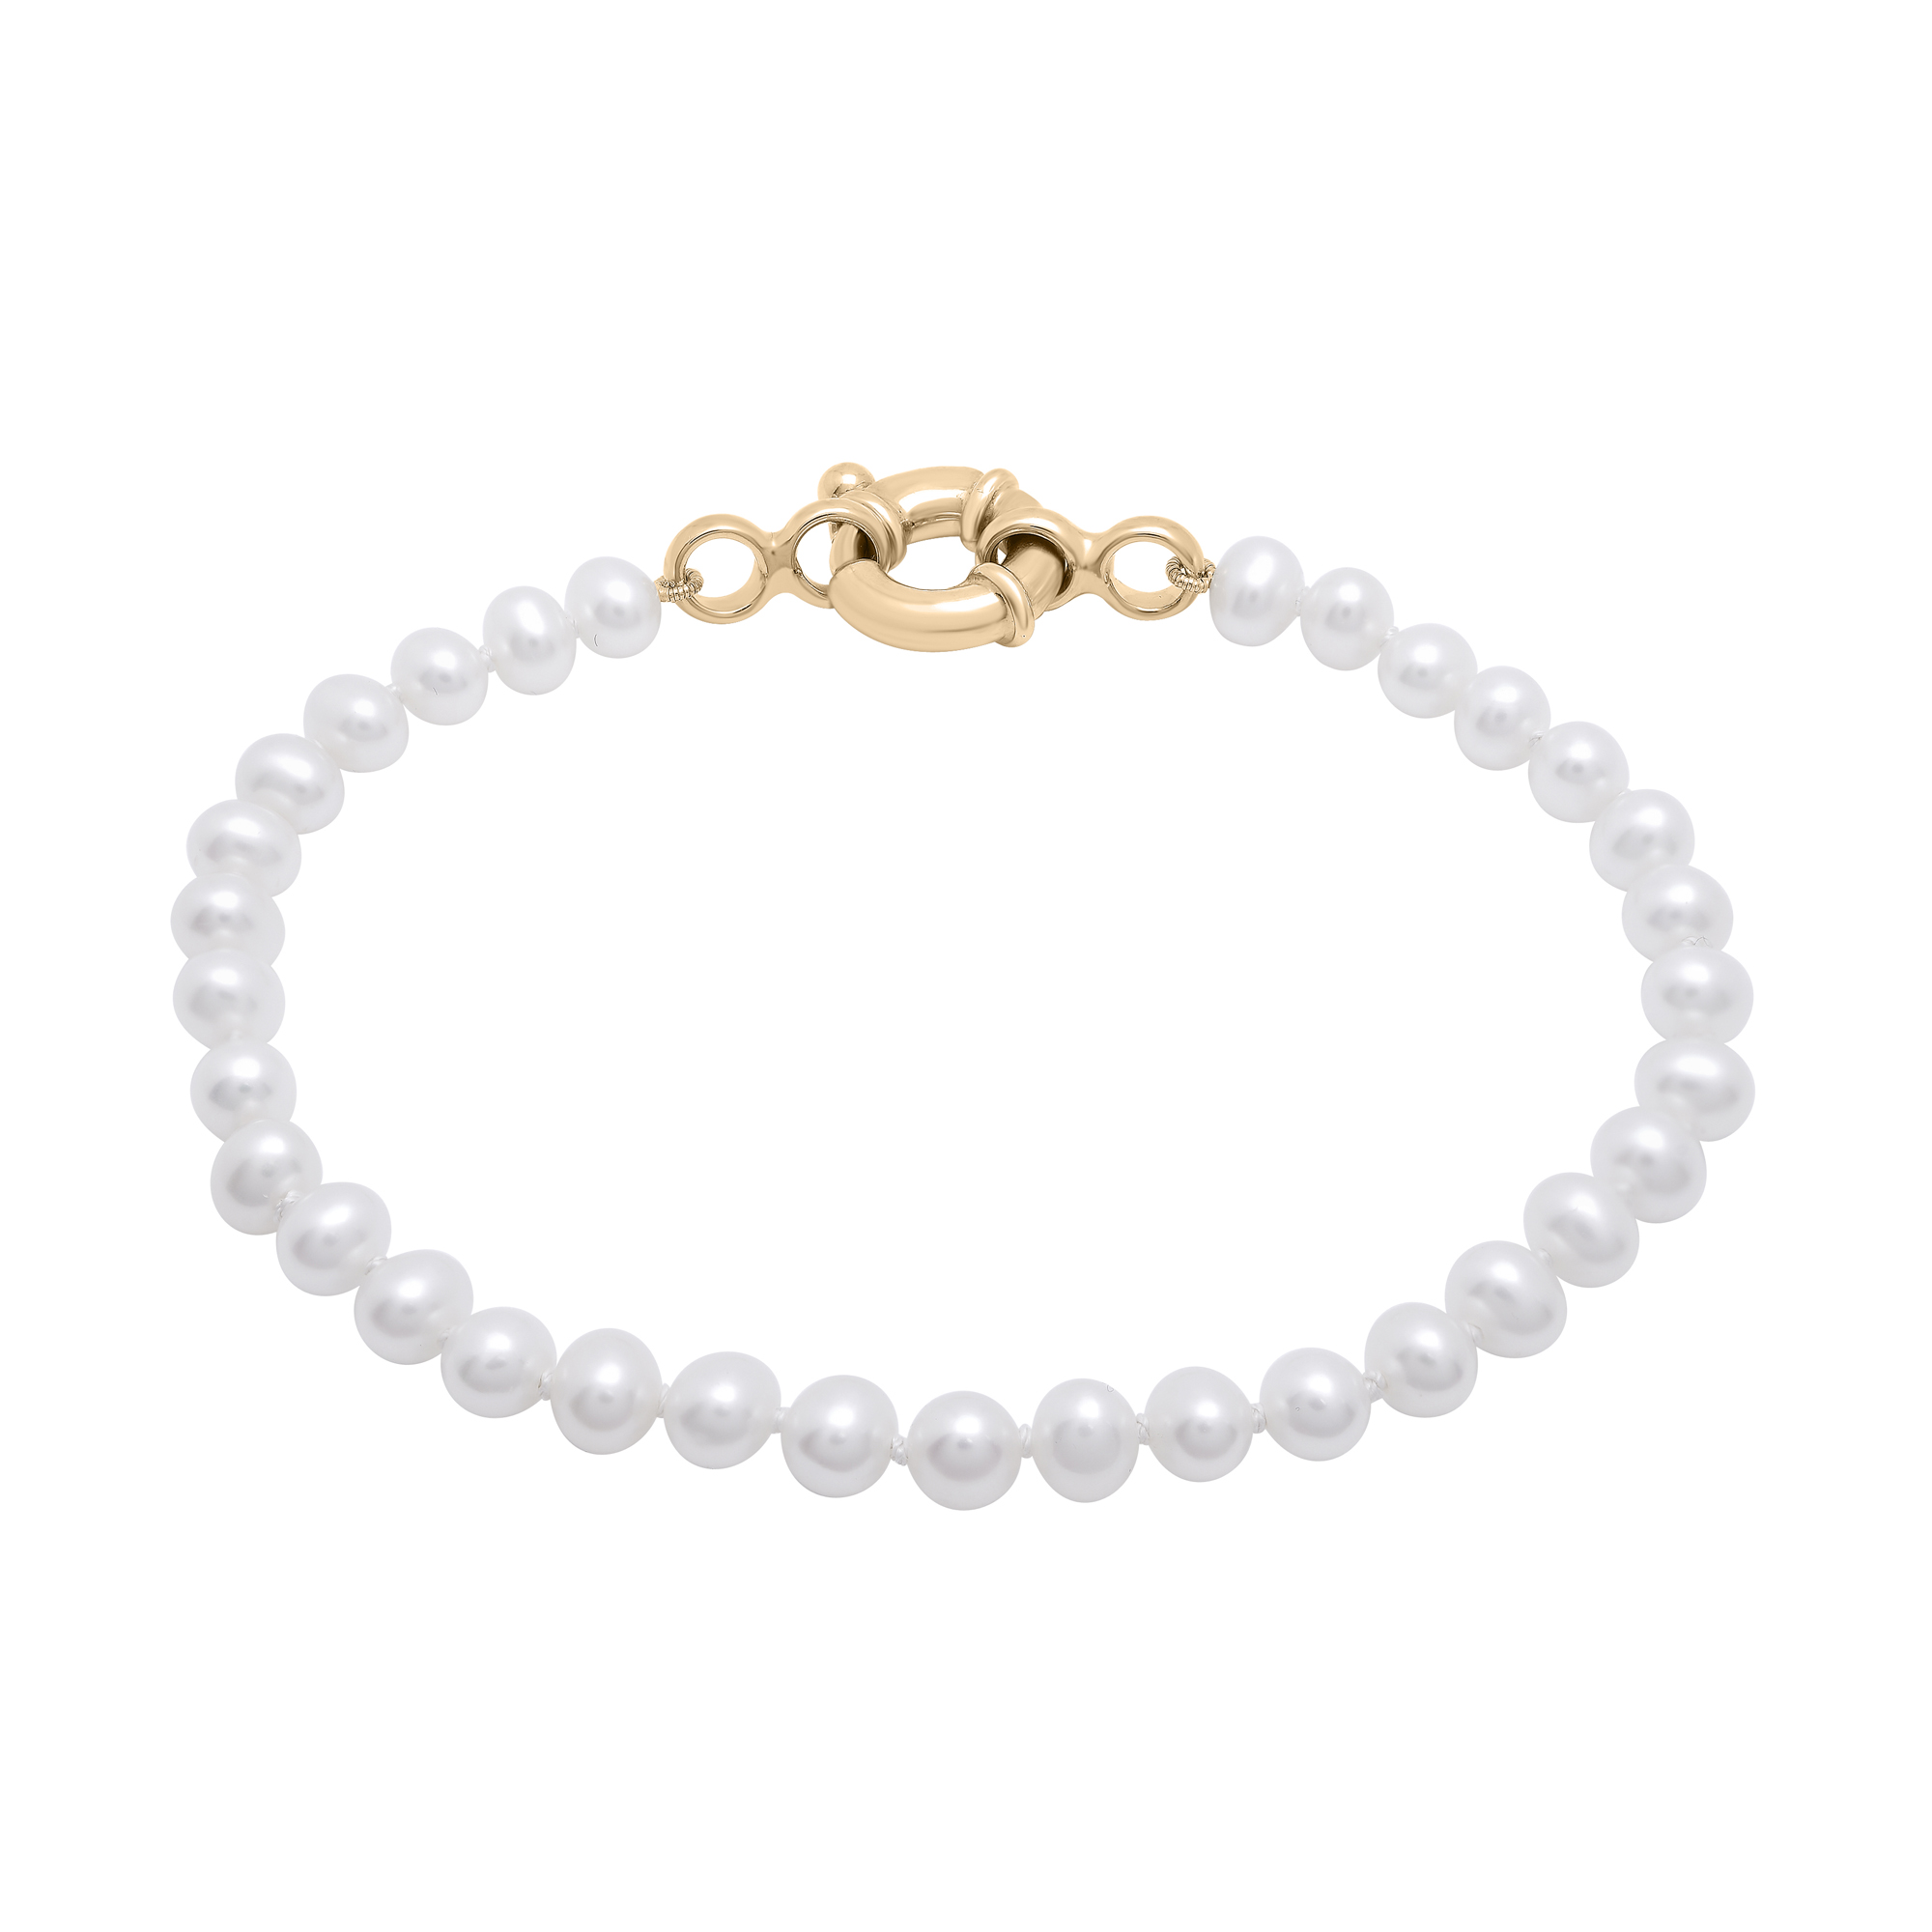 Monogram Initials Bracelet with Cultured White Pearls